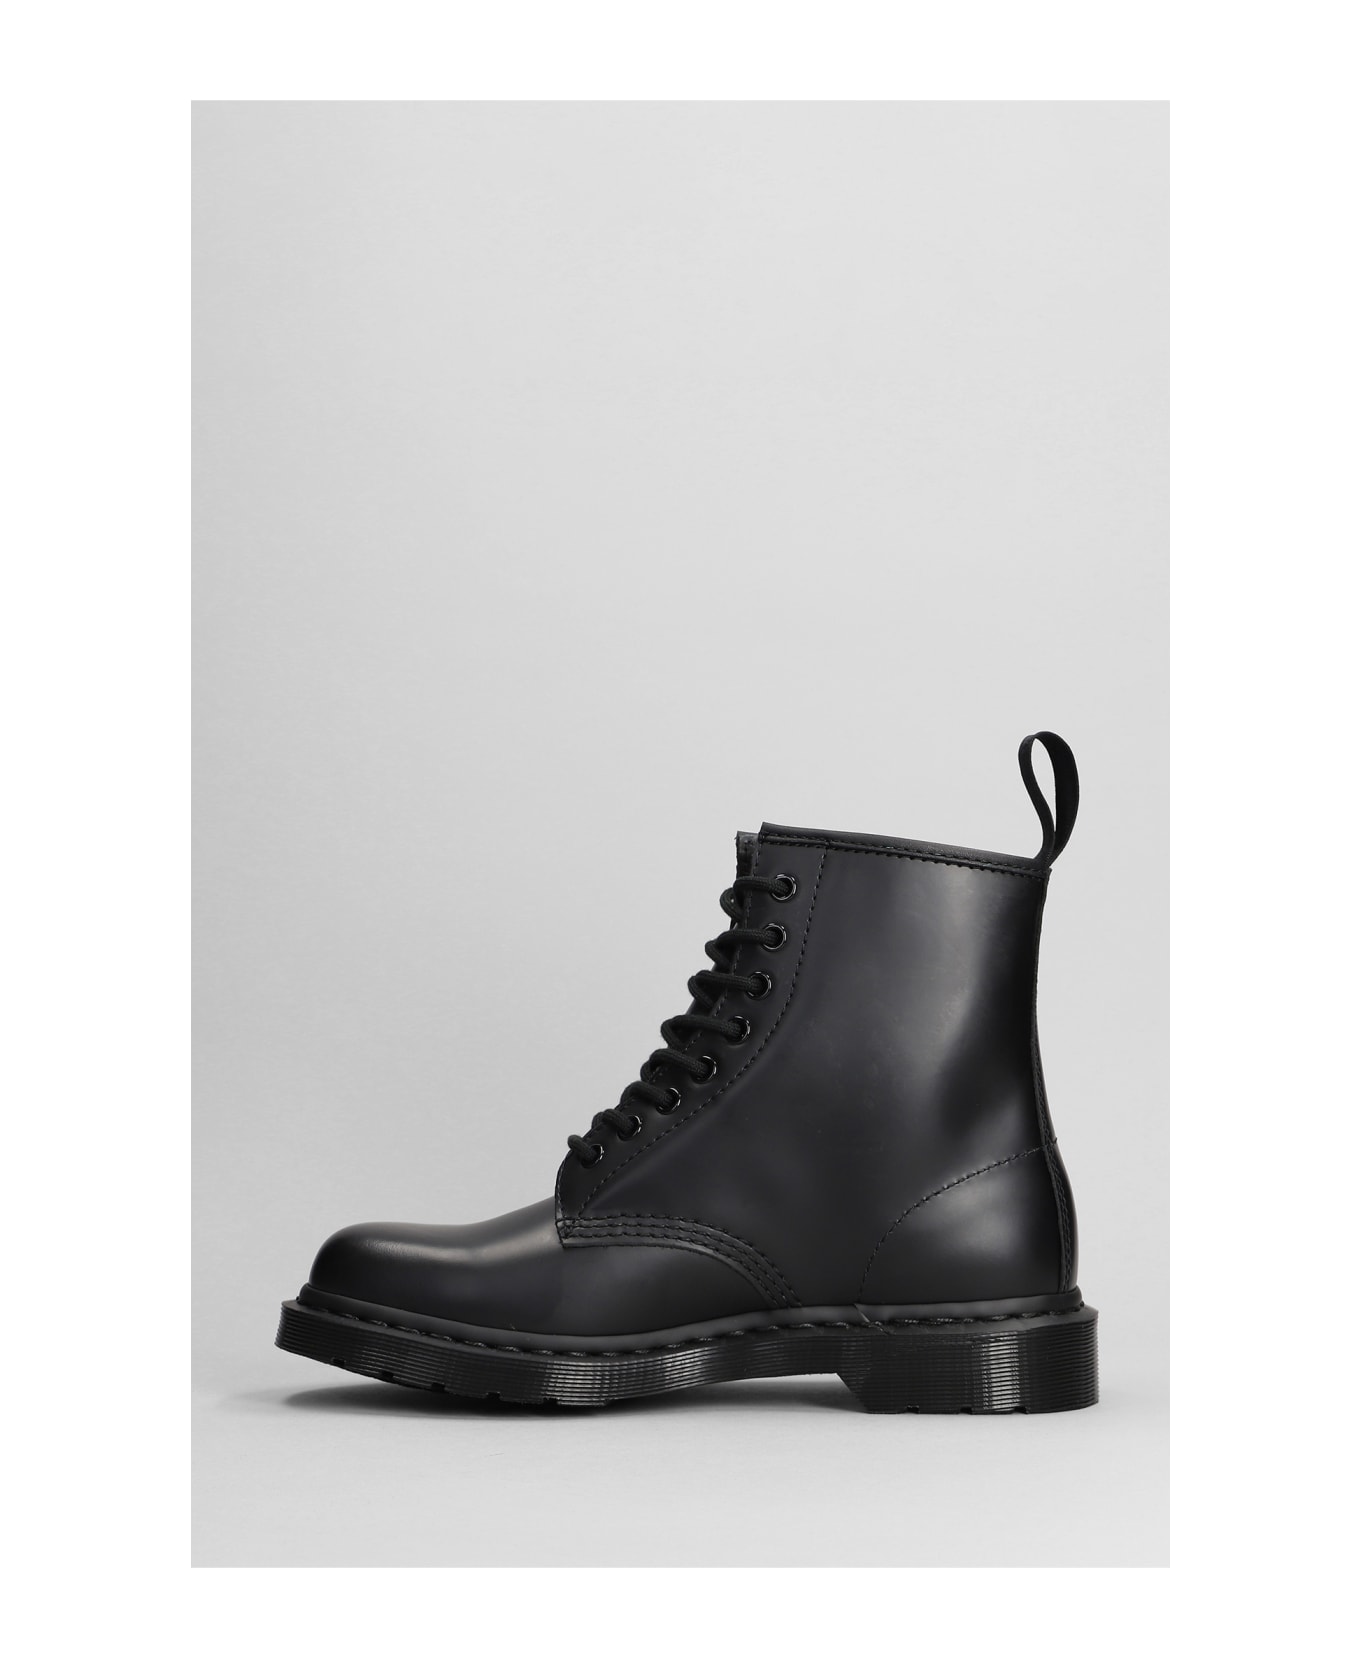 Dr. Martens 1460 Combat Boots In Black Leather - BLACK SMOOTH